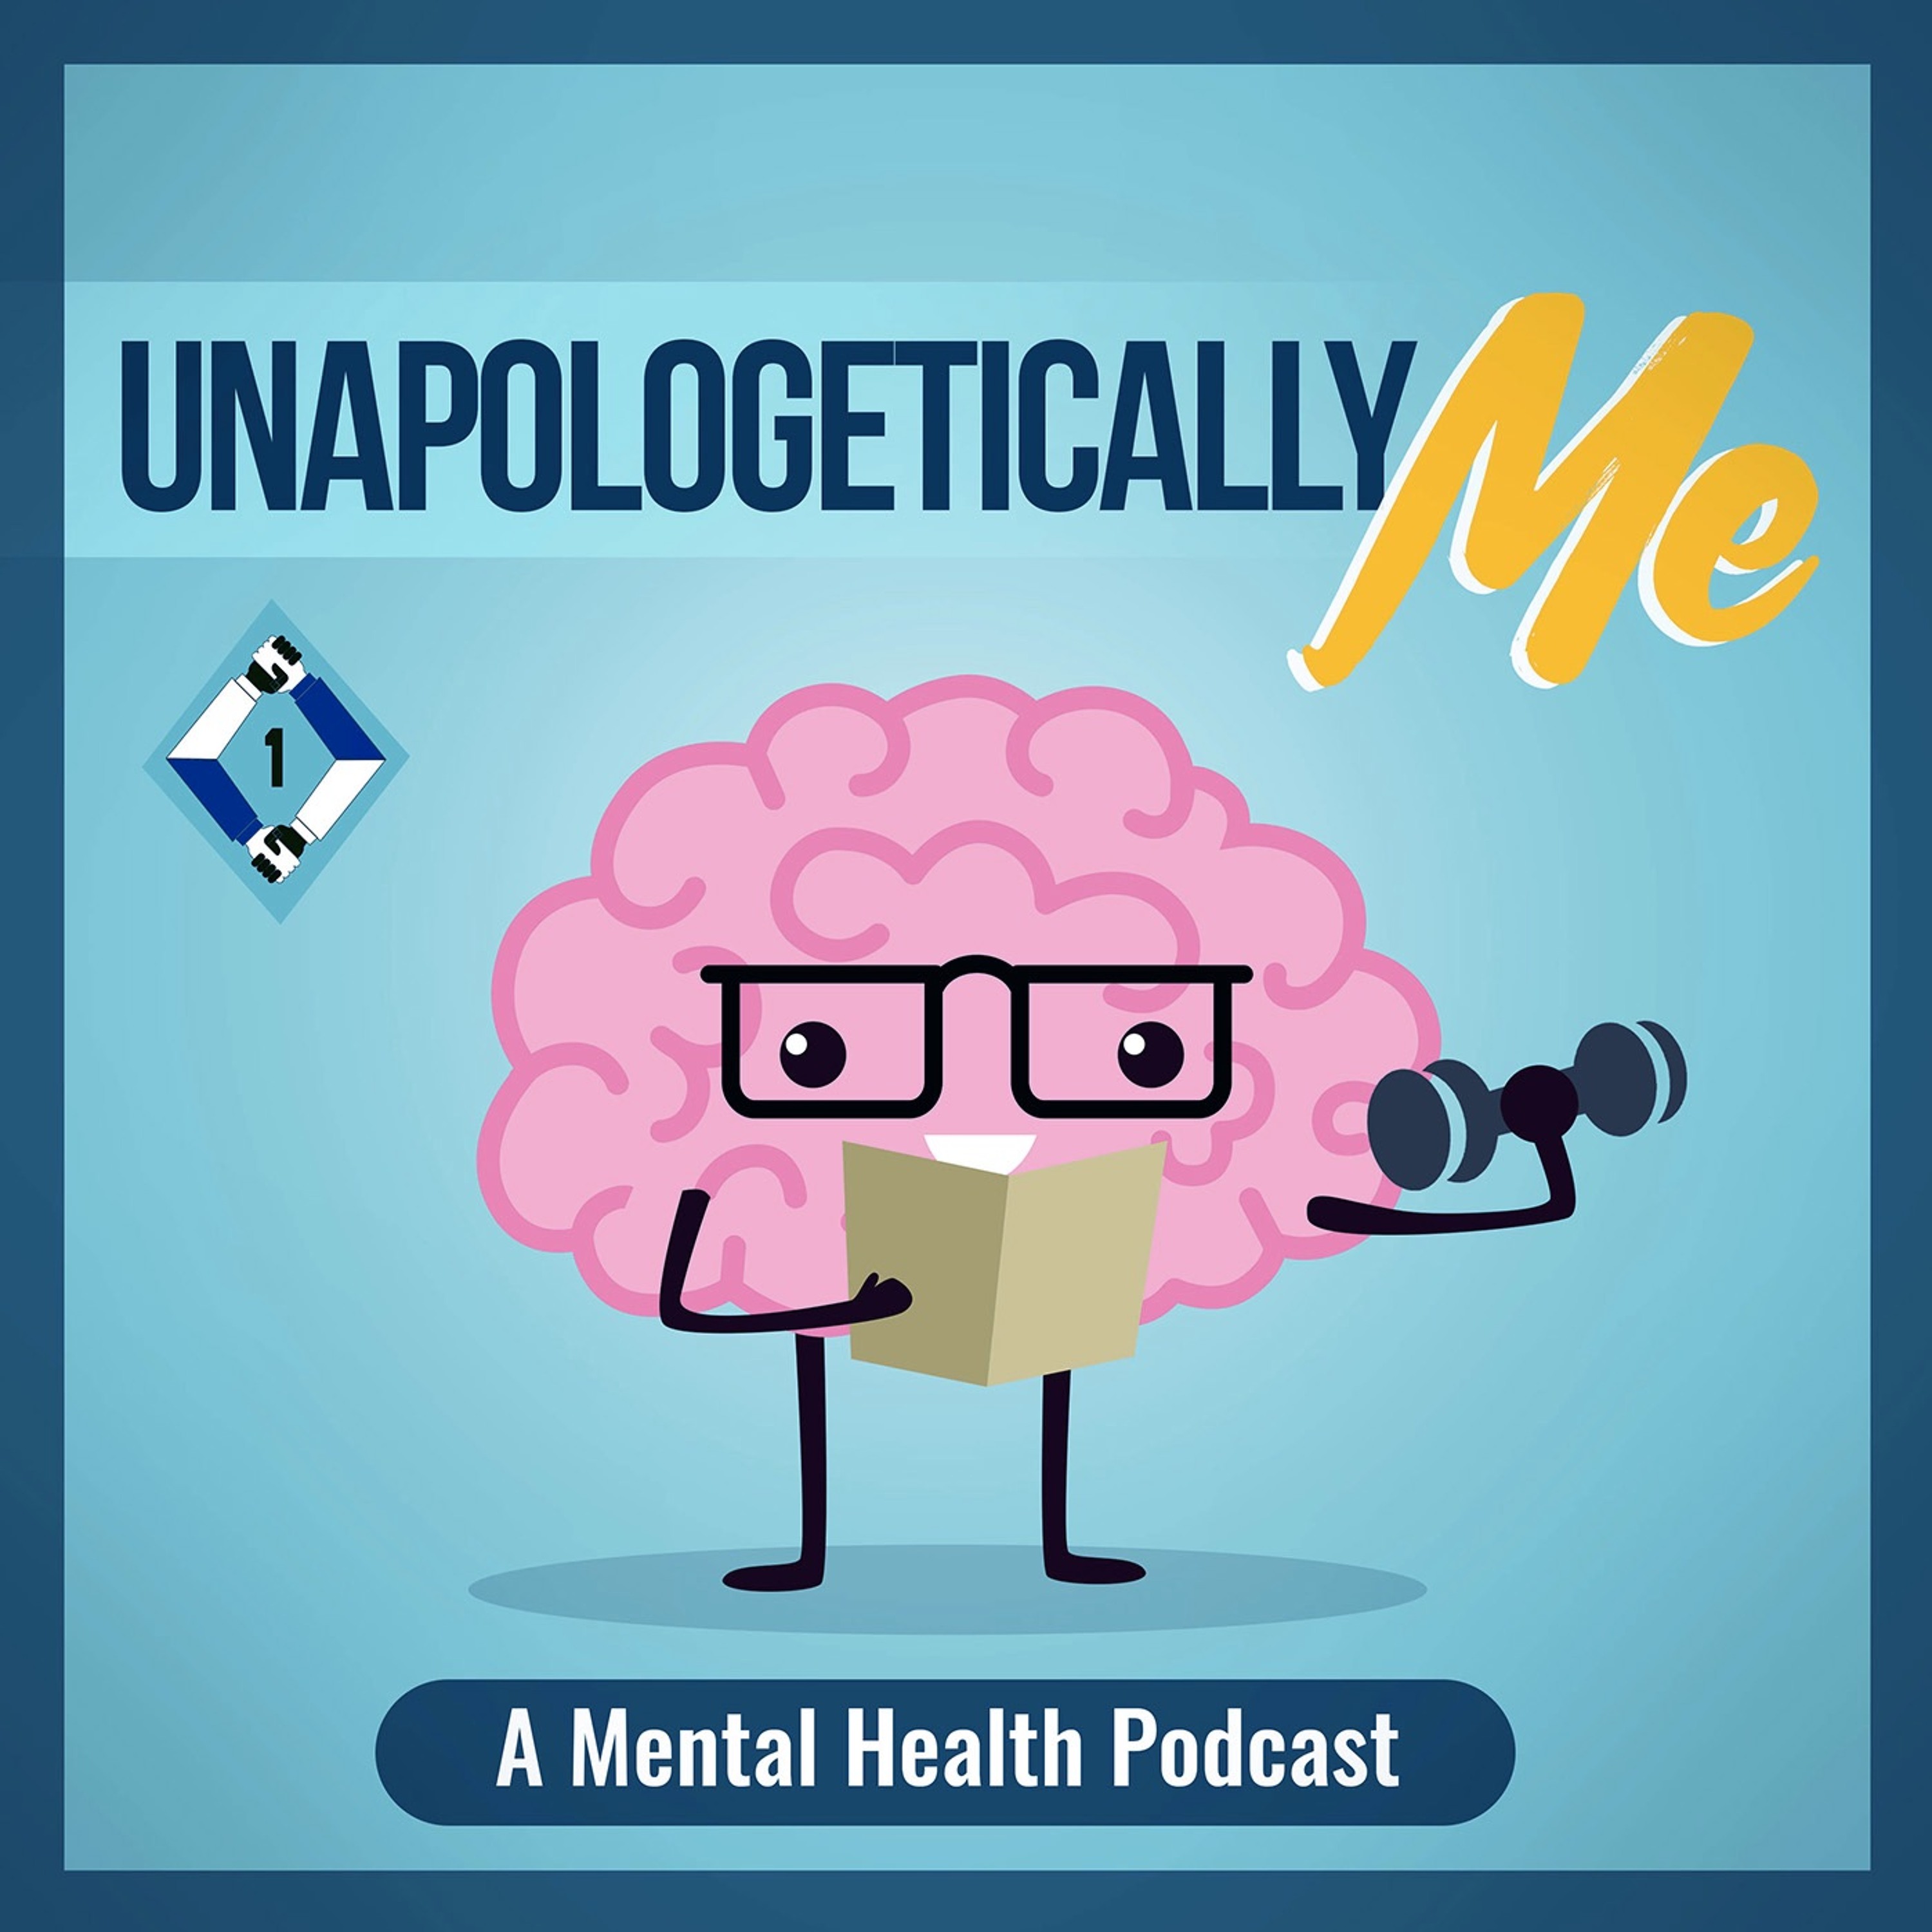 Unapologetically Me: A Mental Health Podcast - Kidney Failure